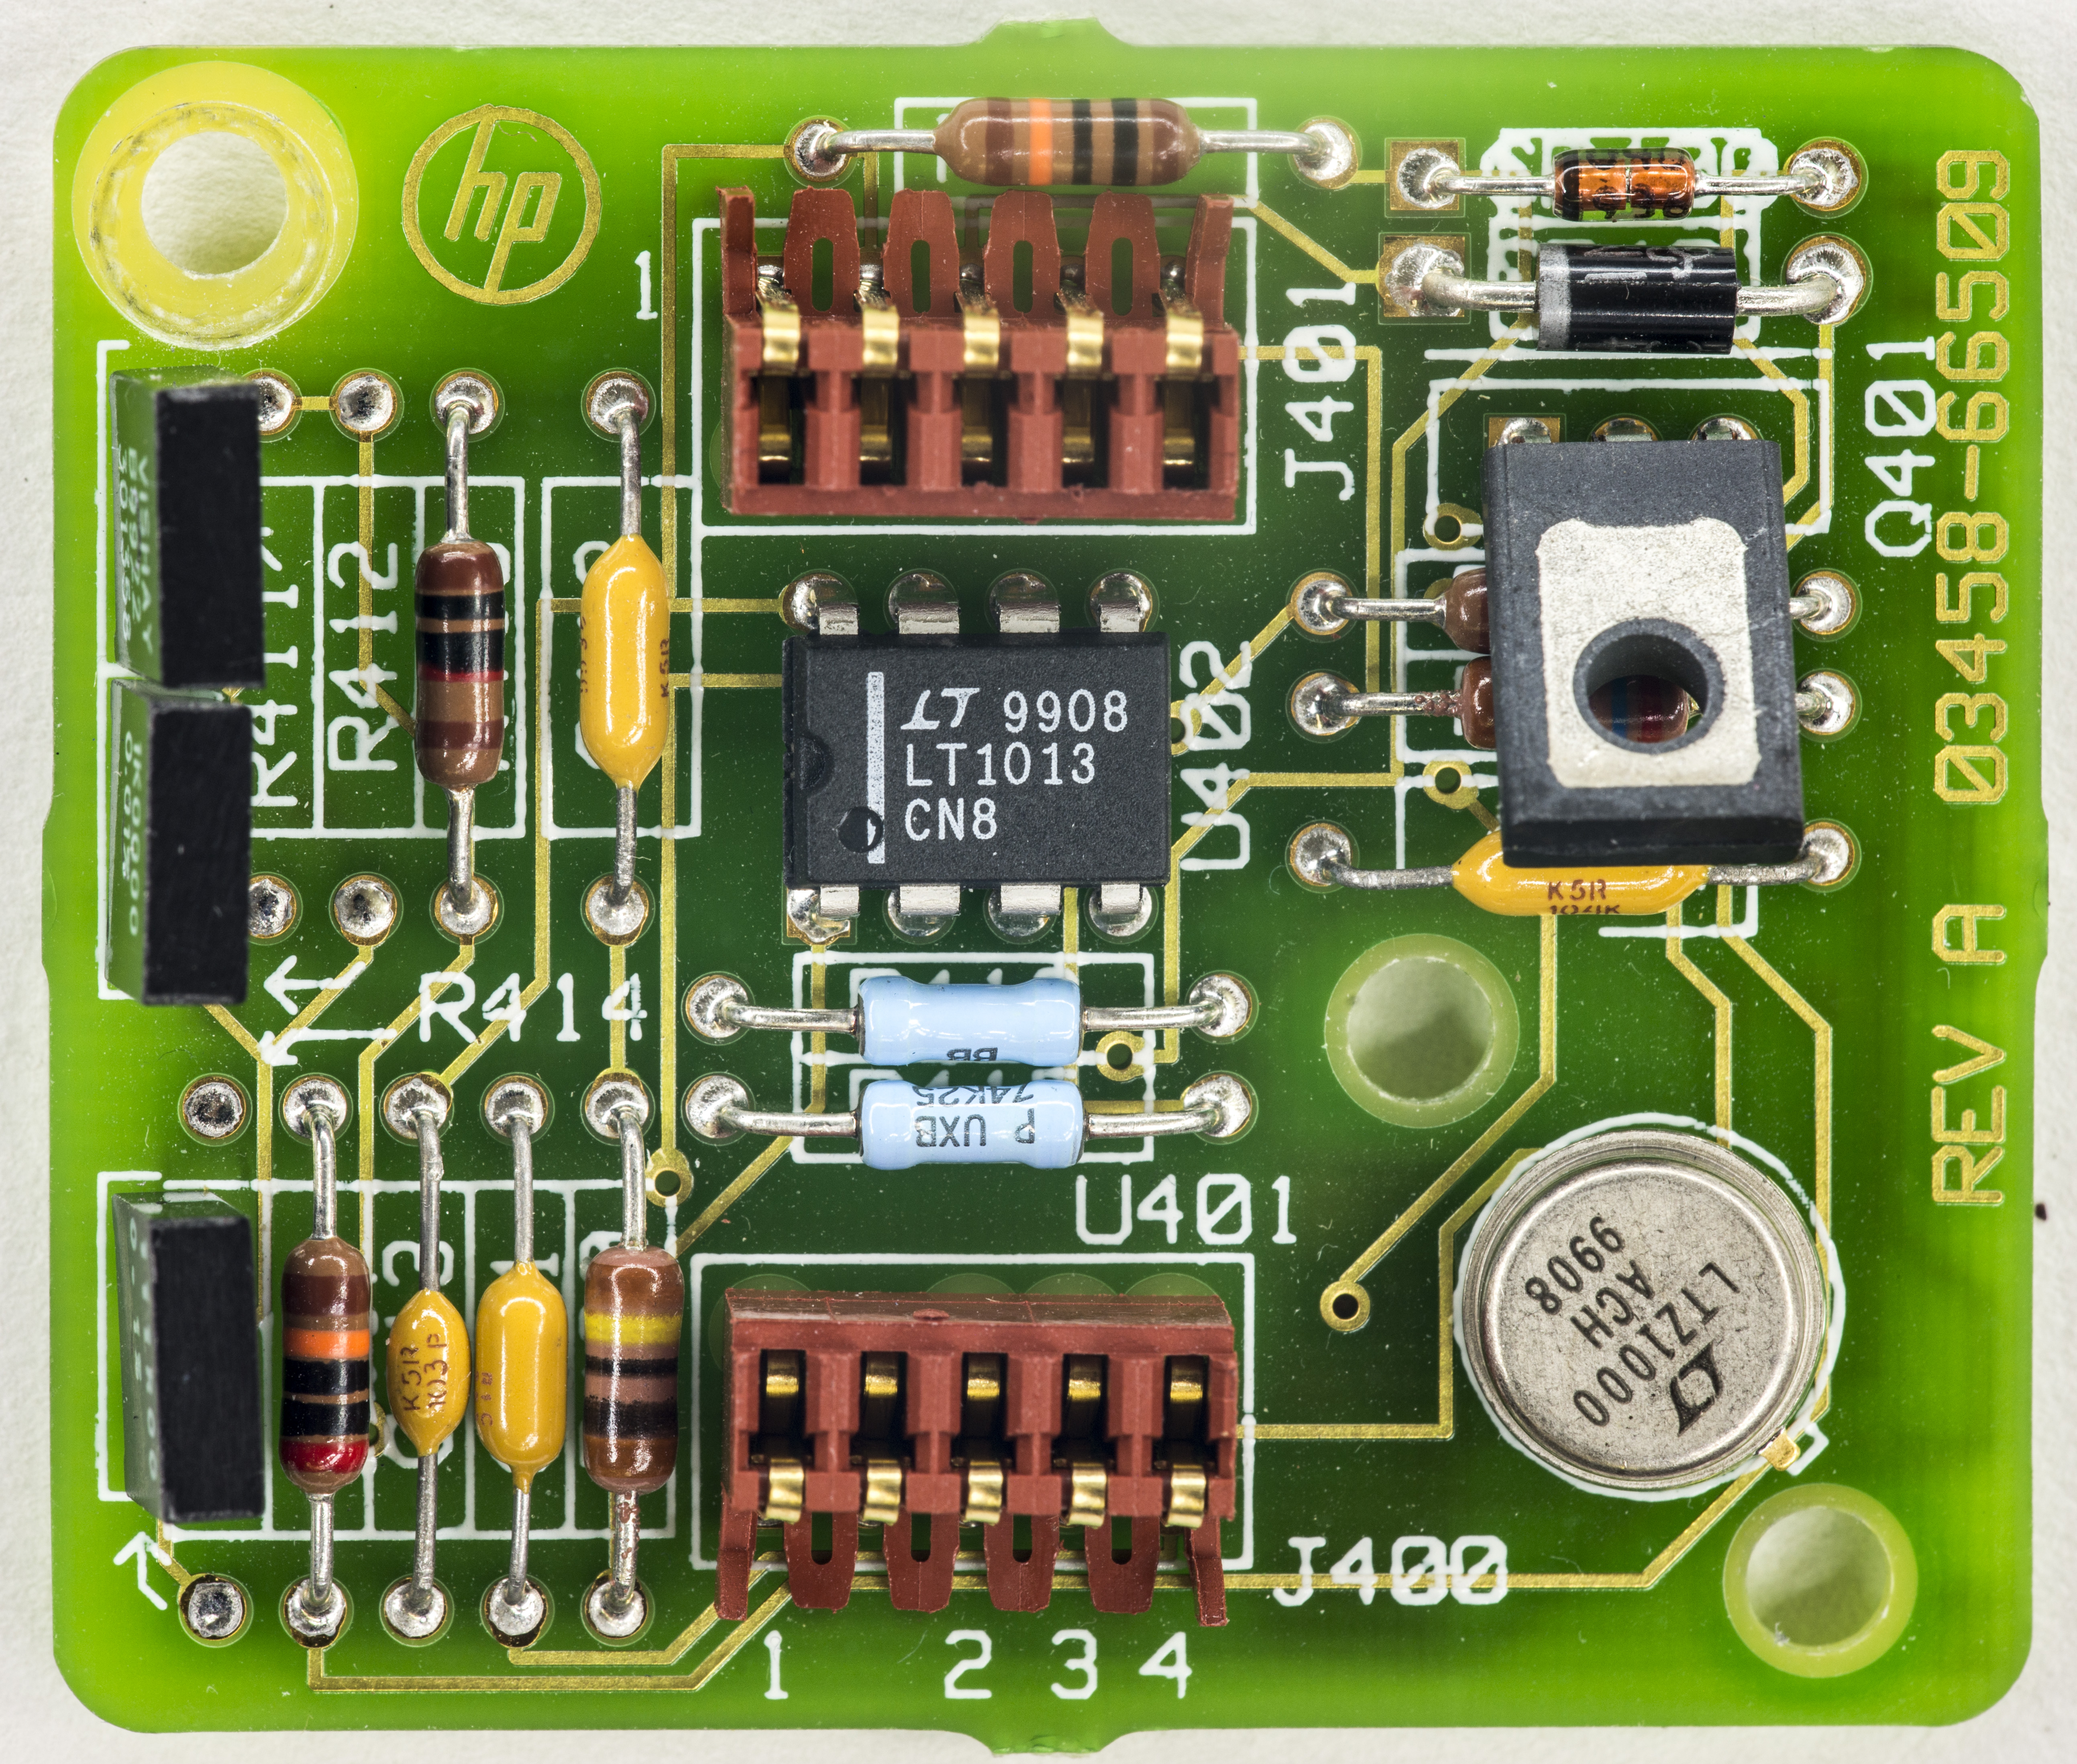 8-Channel Isolated 0-20 mA D/A Board with current and voltage readback -  Aerospace DAQ, Test, HIL - UEI